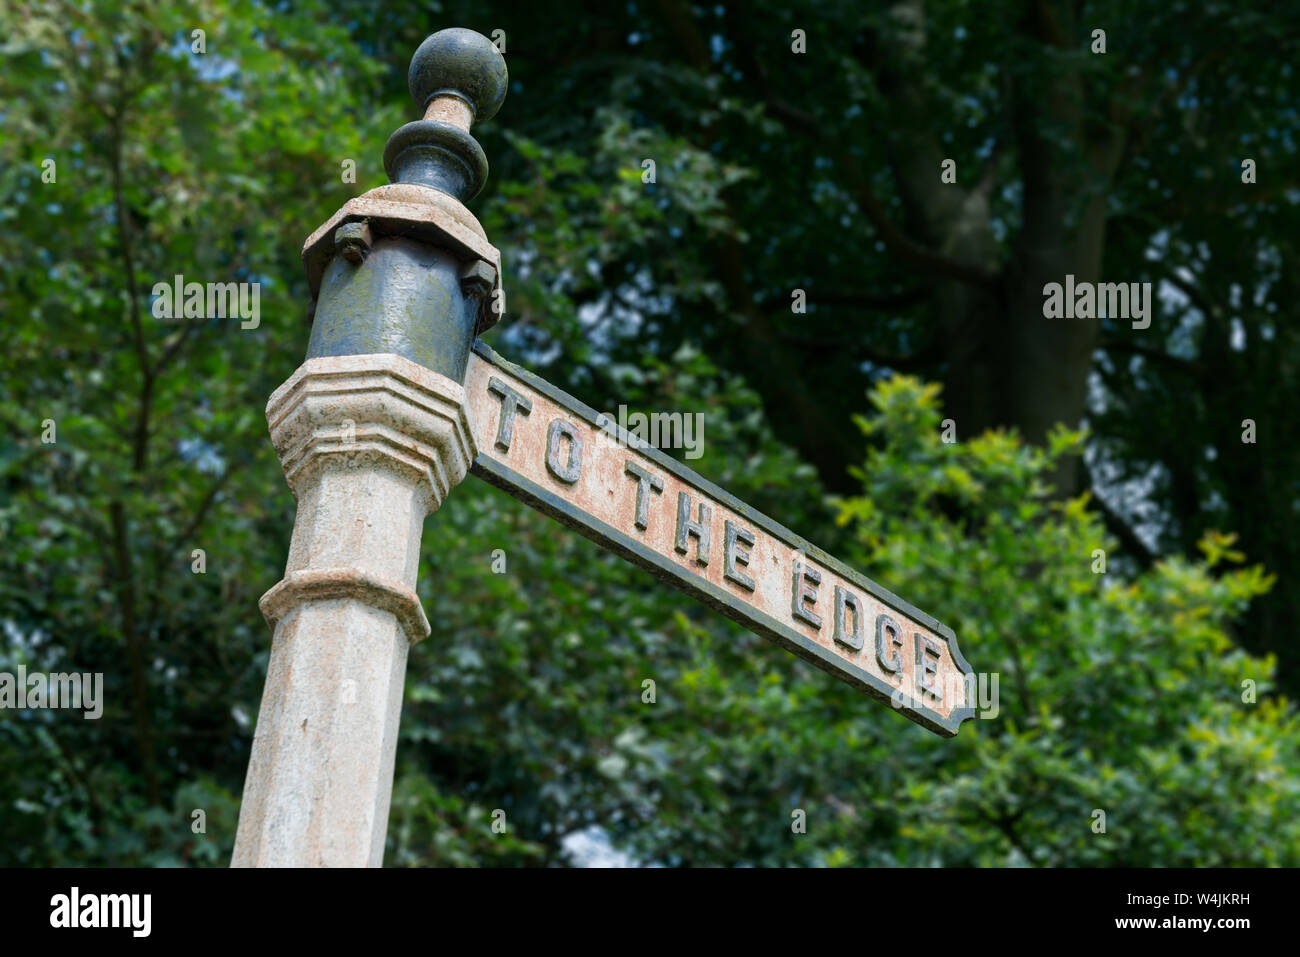 An old fashioned sign indicates 'to the edge' lookout in the small town of Alderley Edge in Cheshire, UK. Stock Photo